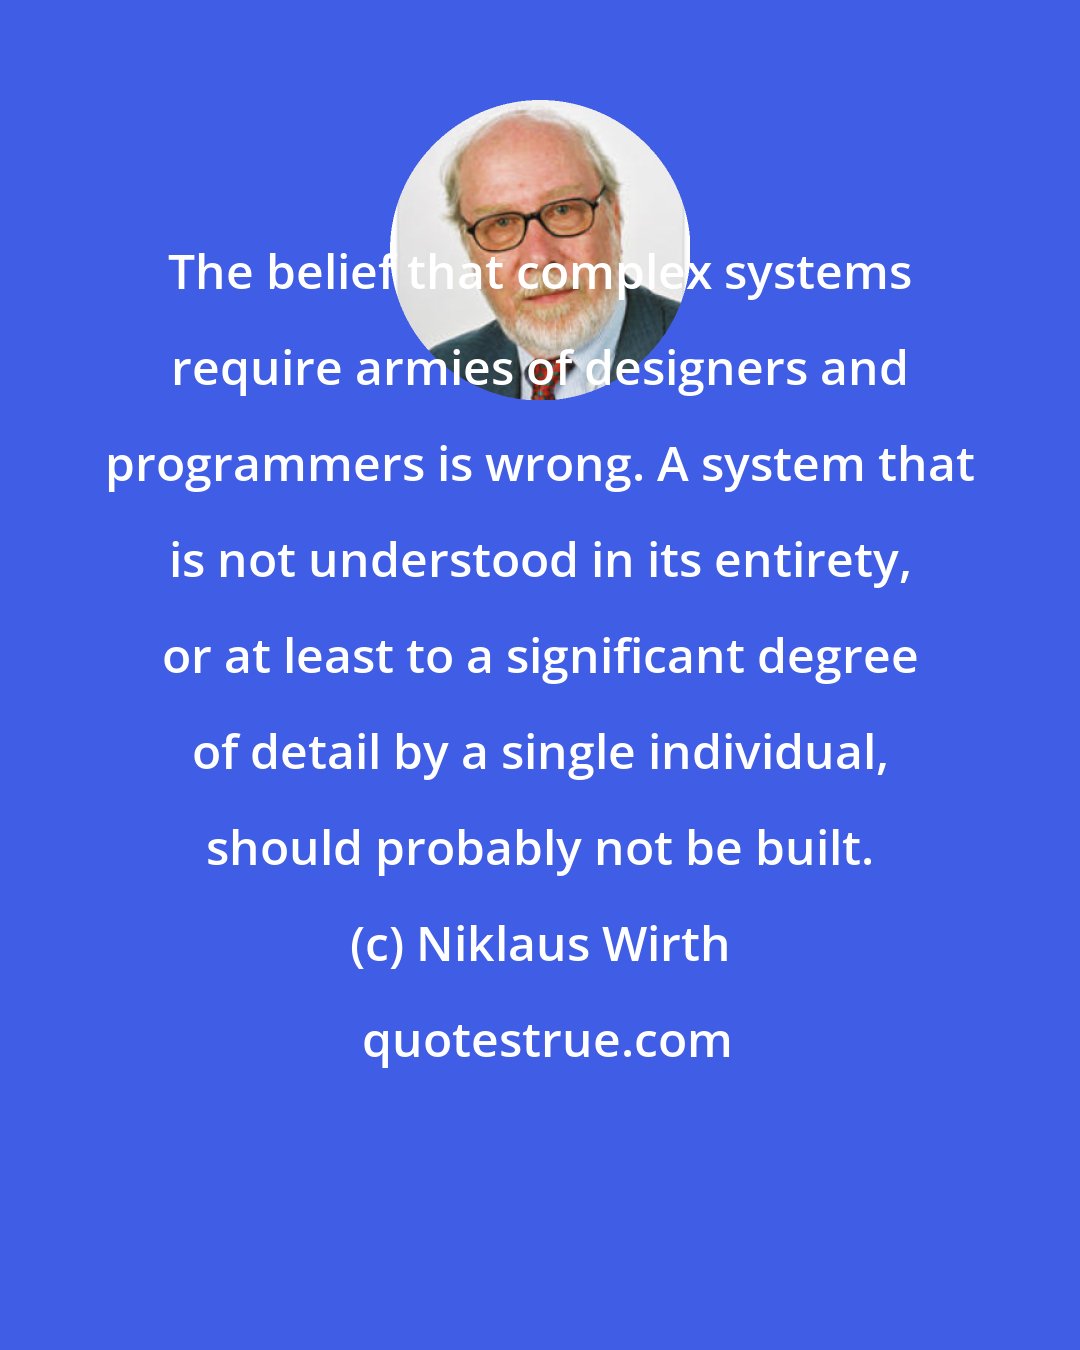 Niklaus Wirth: The belief that complex systems require armies of designers and programmers is wrong. A system that is not understood in its entirety, or at least to a significant degree of detail by a single individual, should probably not be built.